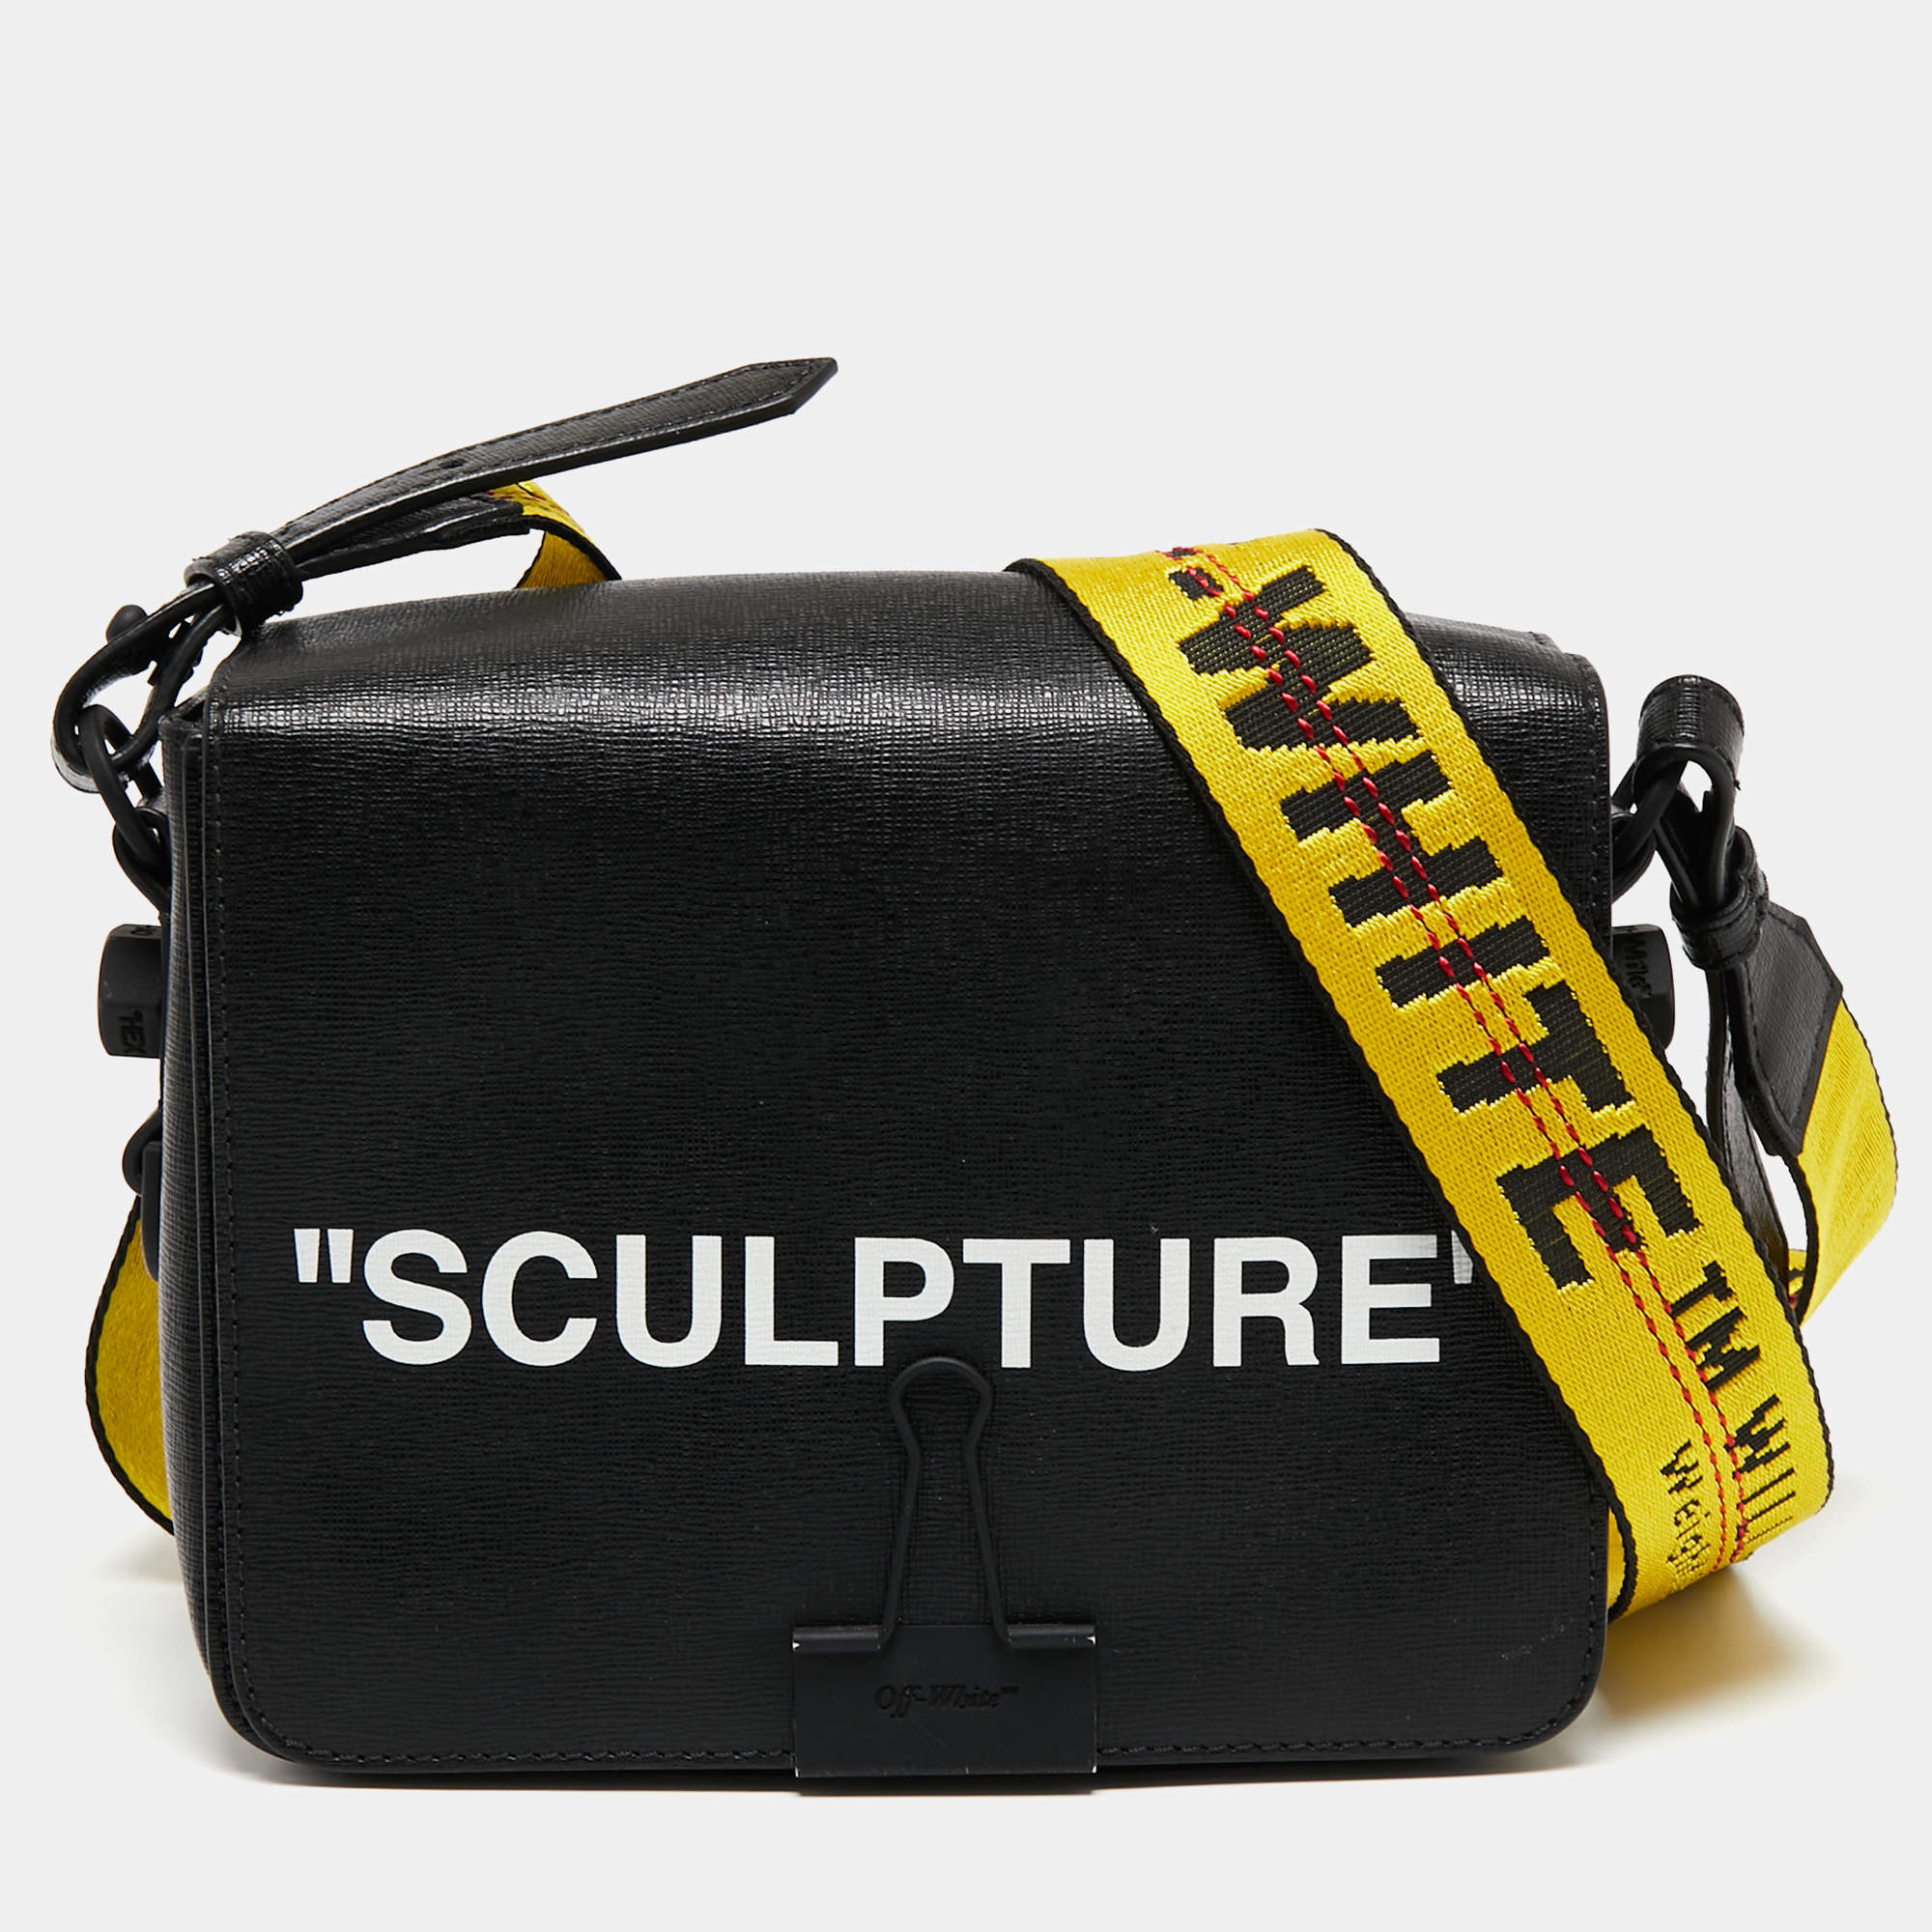 Off-White™ Canvas and Leather SCULPTURE Bag